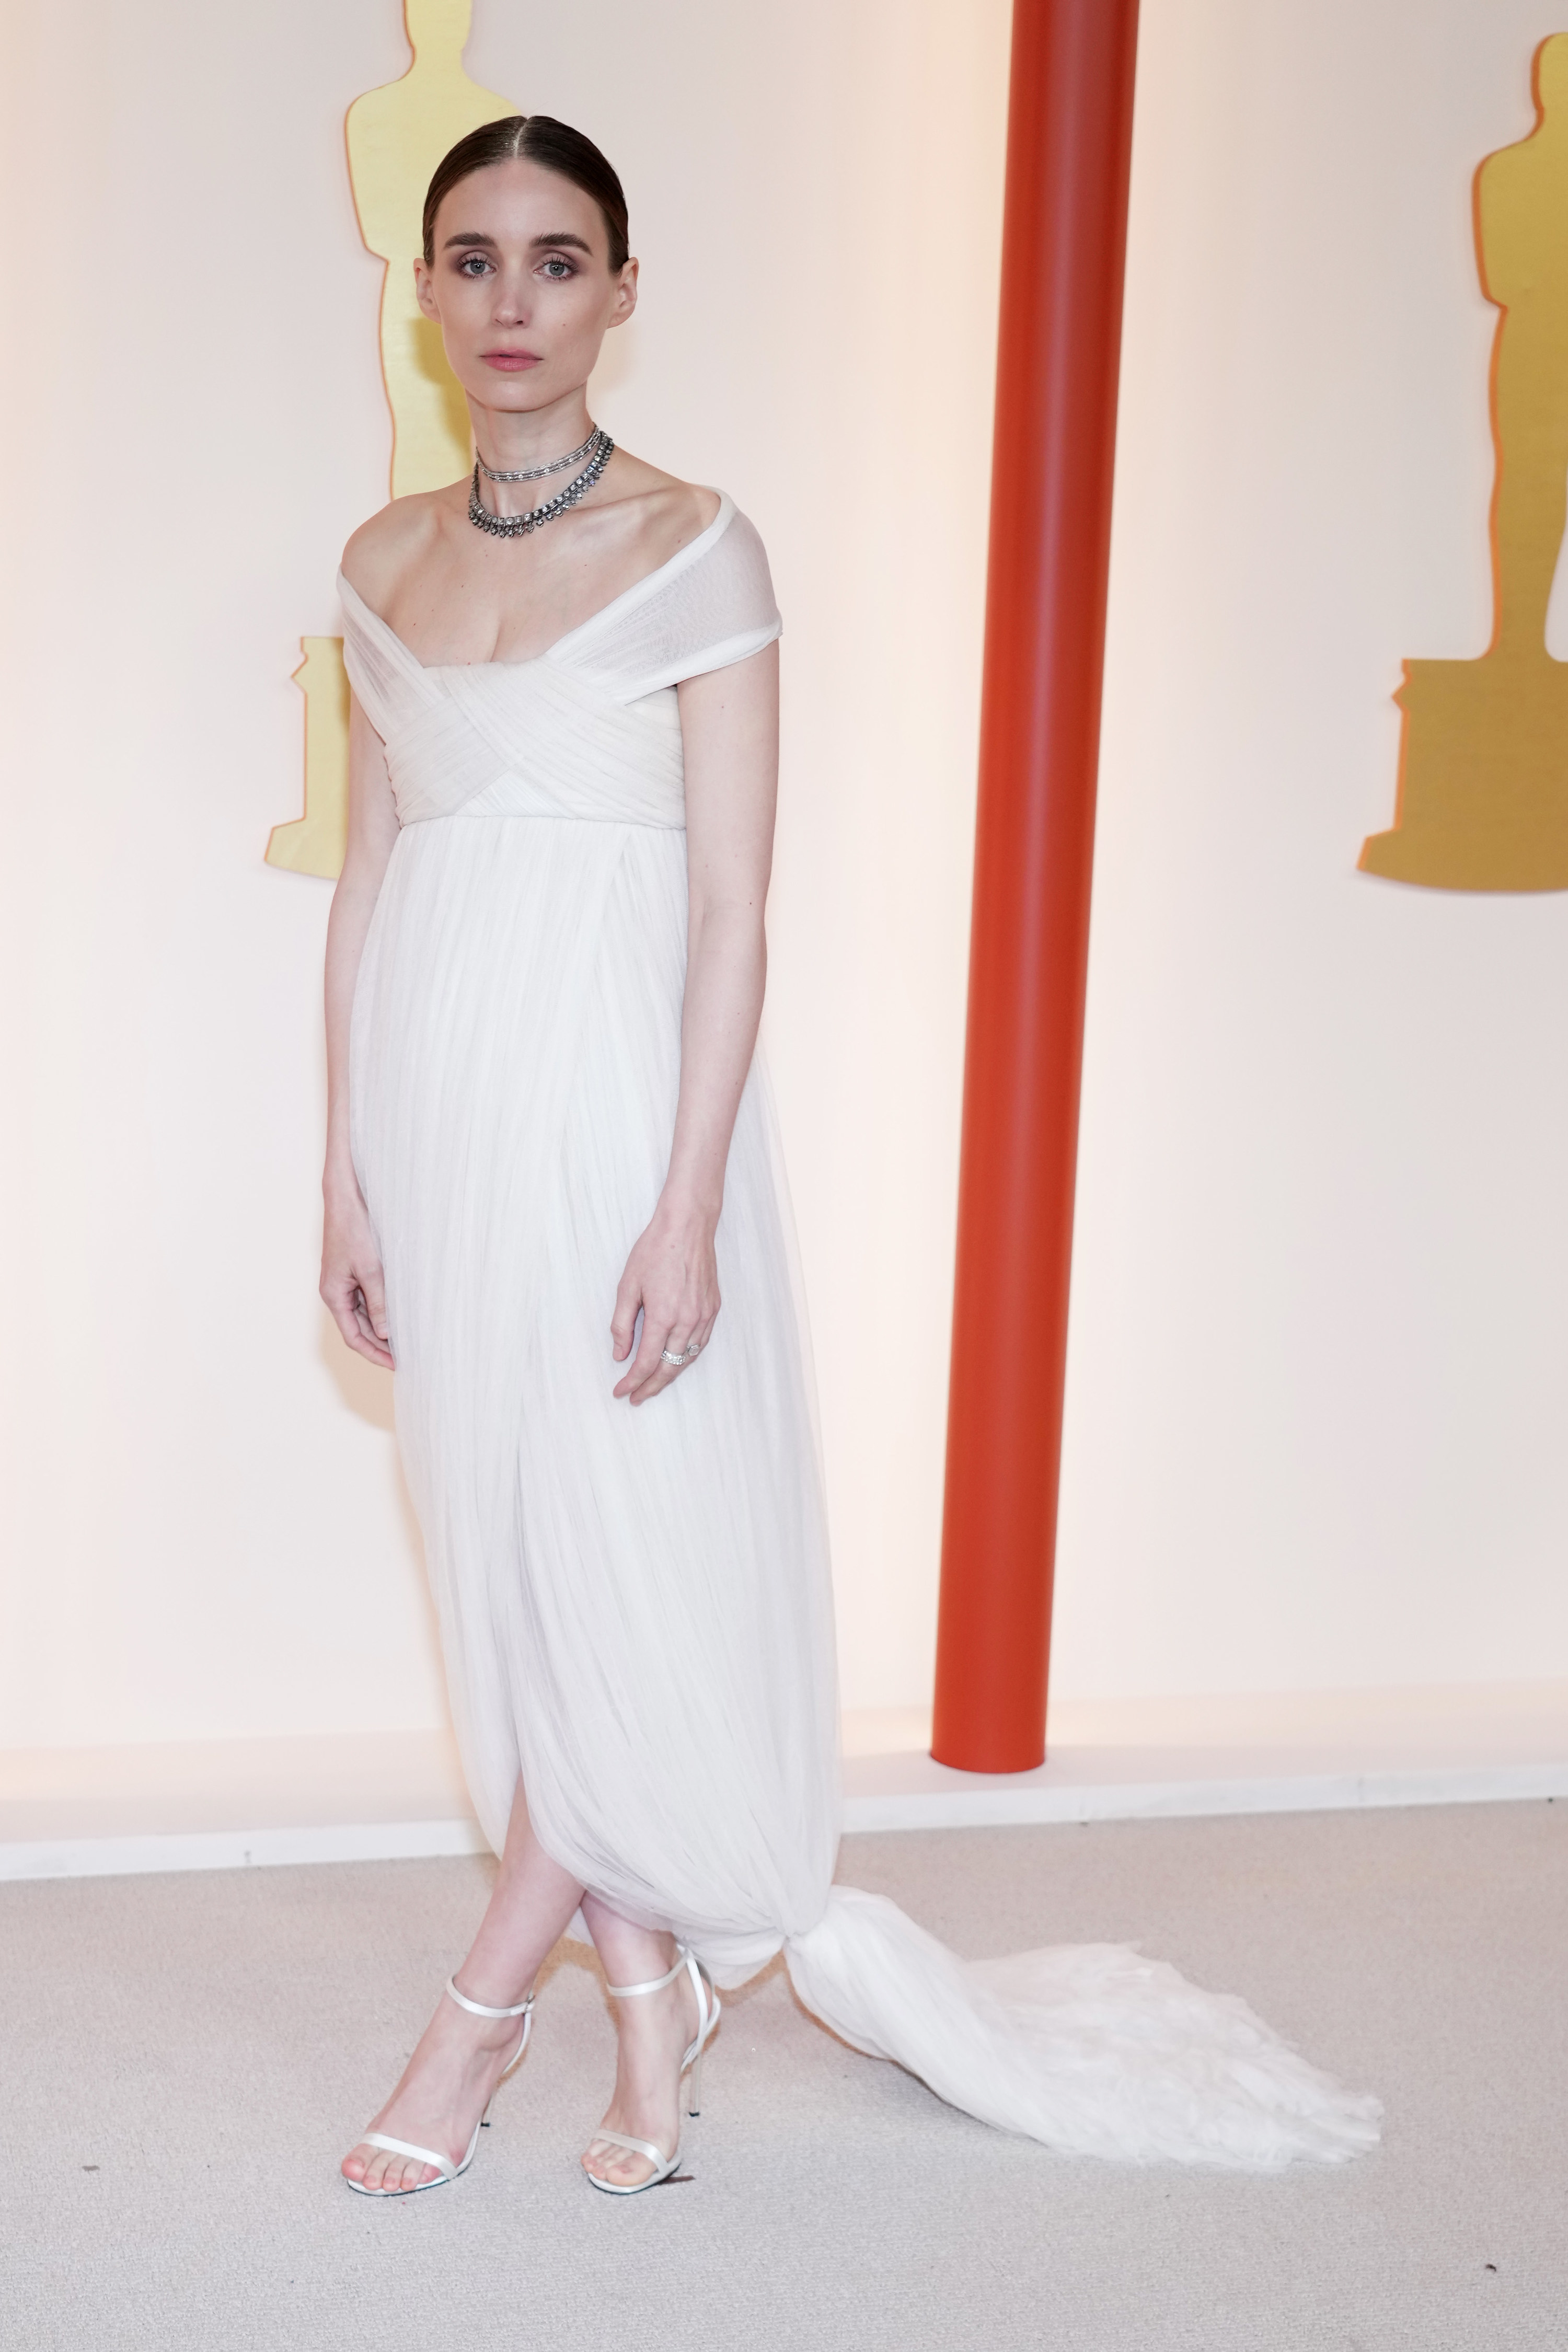 Rooney in an off-the-shoulder gown with small train